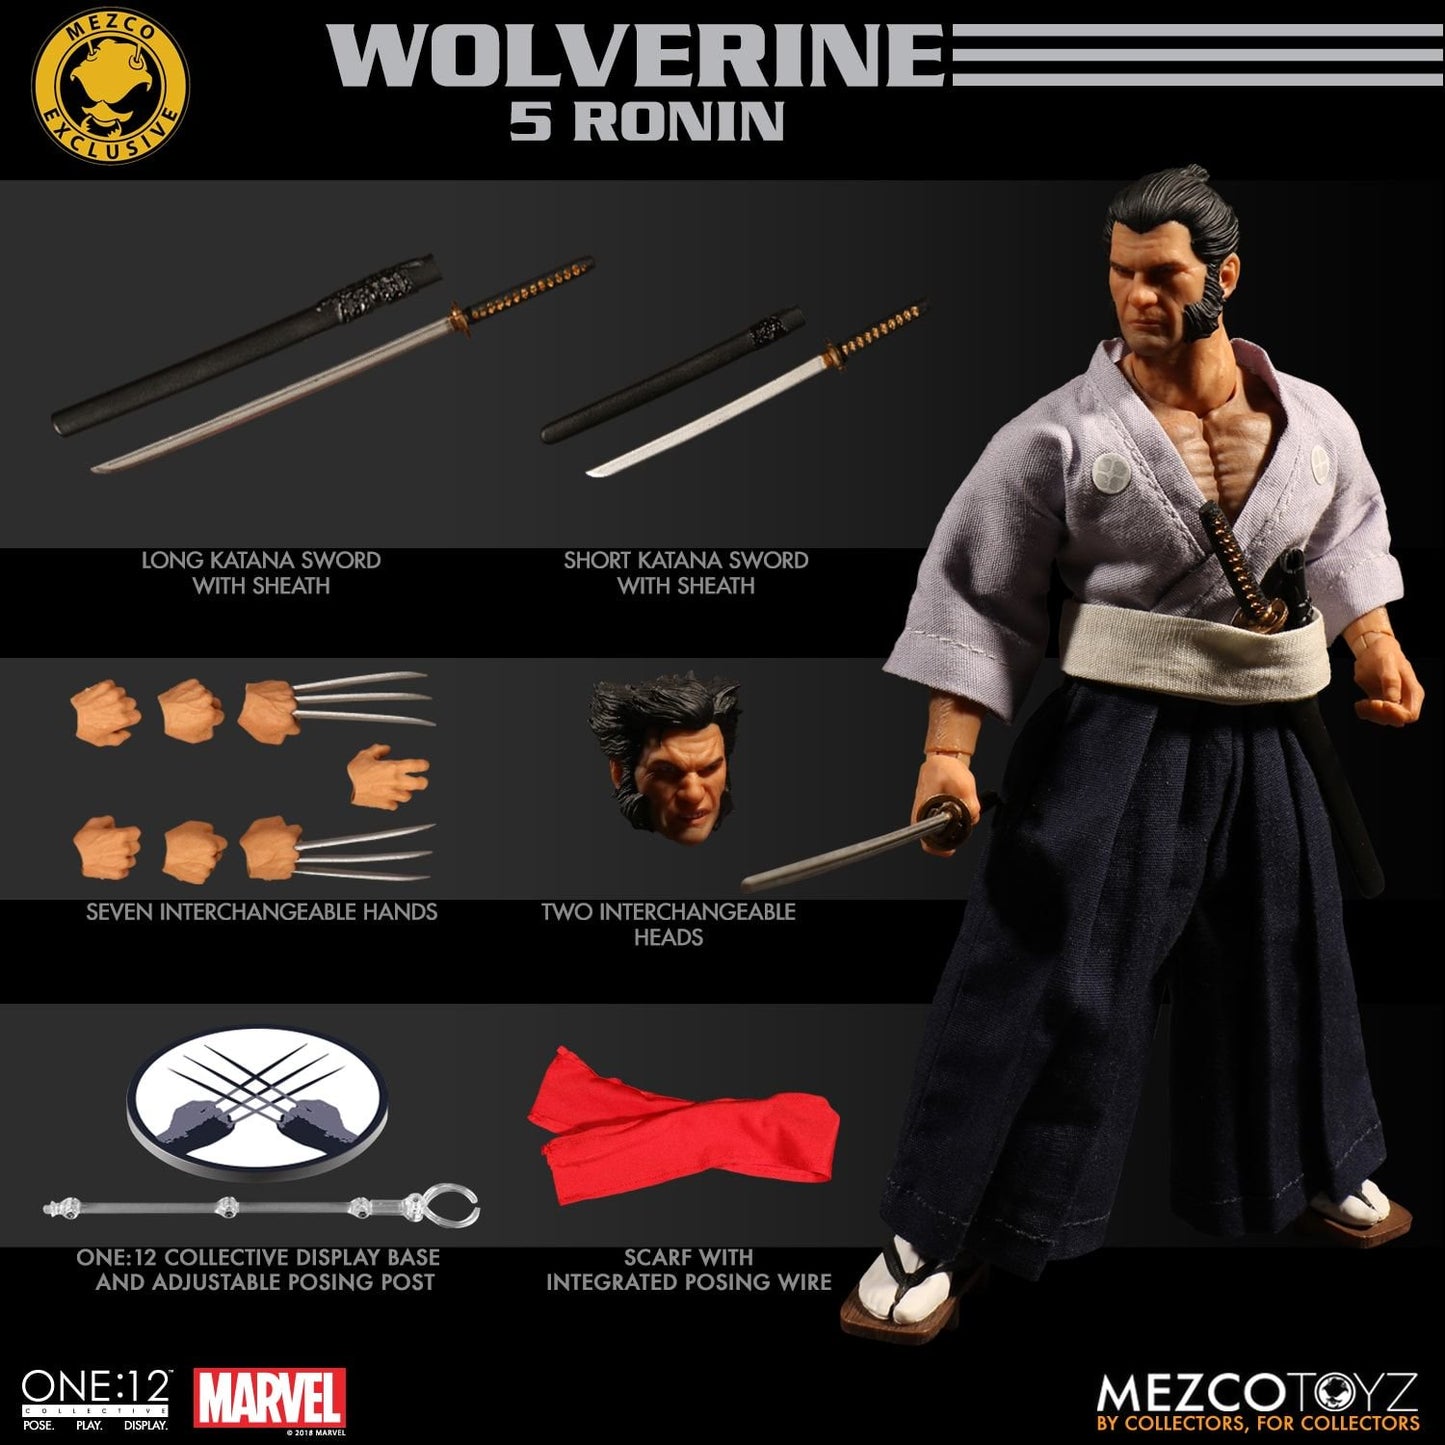 Marvel One:12 Collective 5 Ronin Wolverine Exclusive